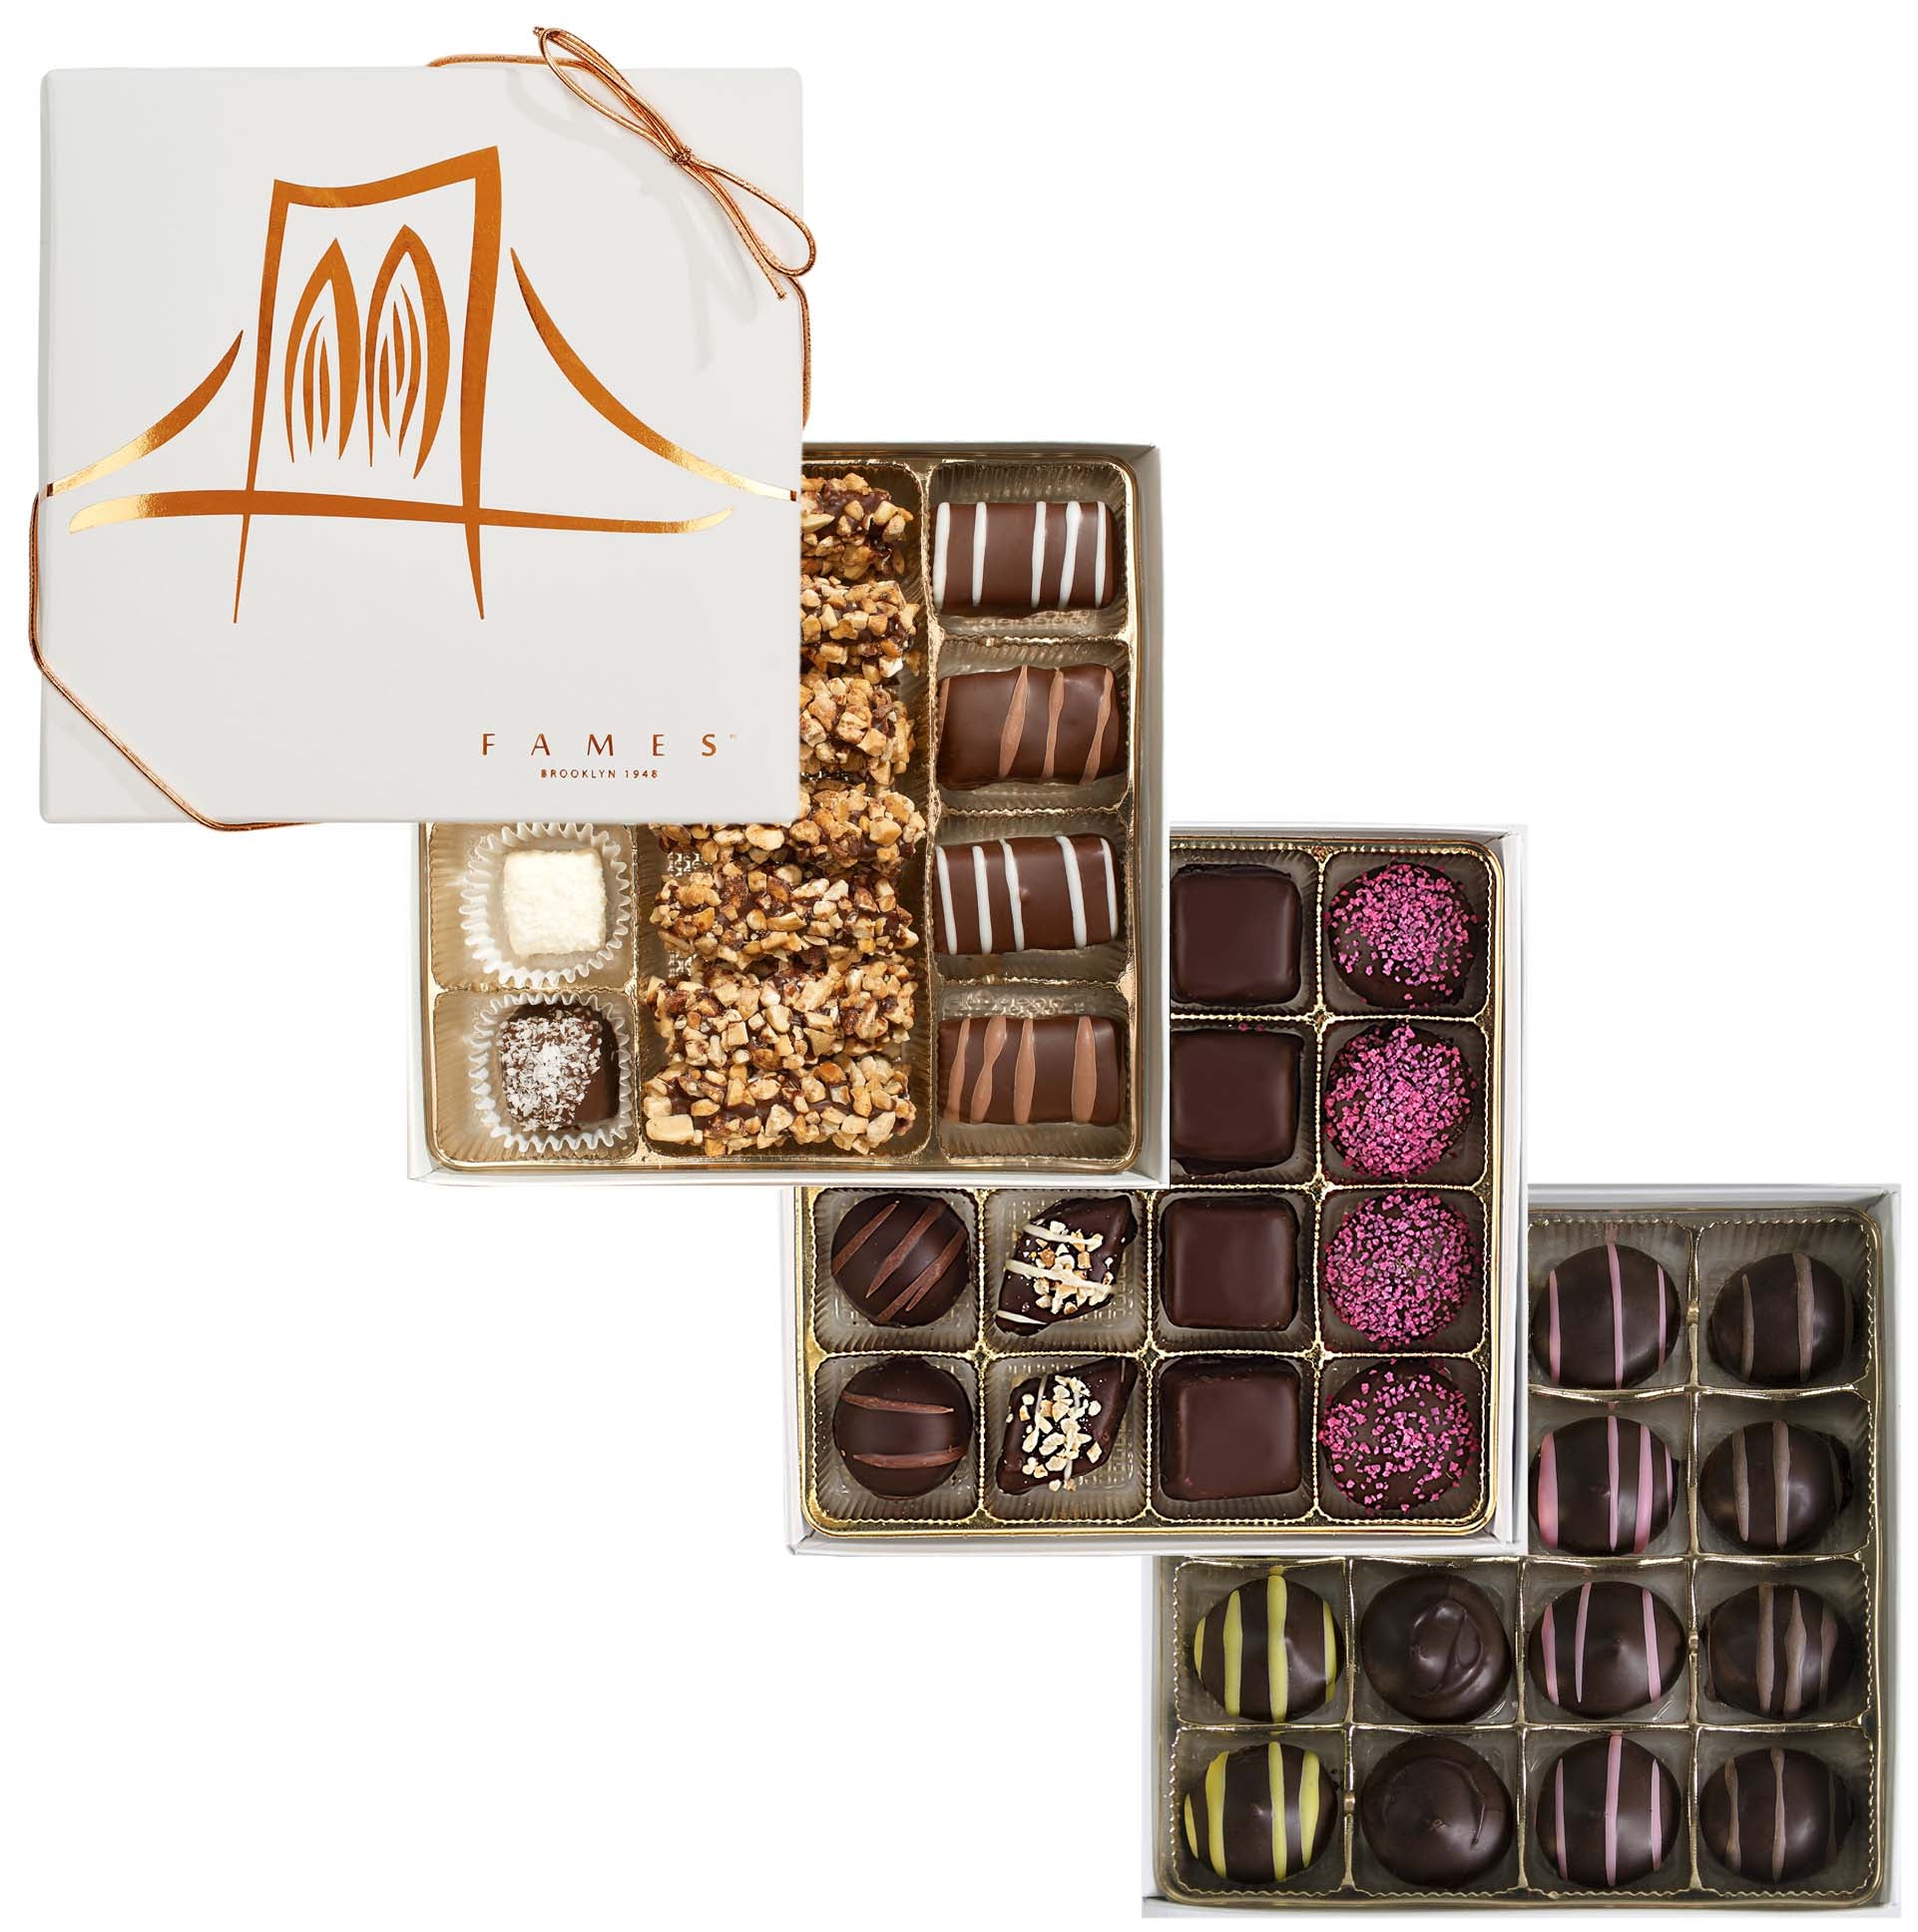 Artisan Crafted Chocolate Gift Boxes, 3 Assorted Chocolate Gift Boxes, 47 pc, Dairy Free, Kosher.  Fames Chocolate   